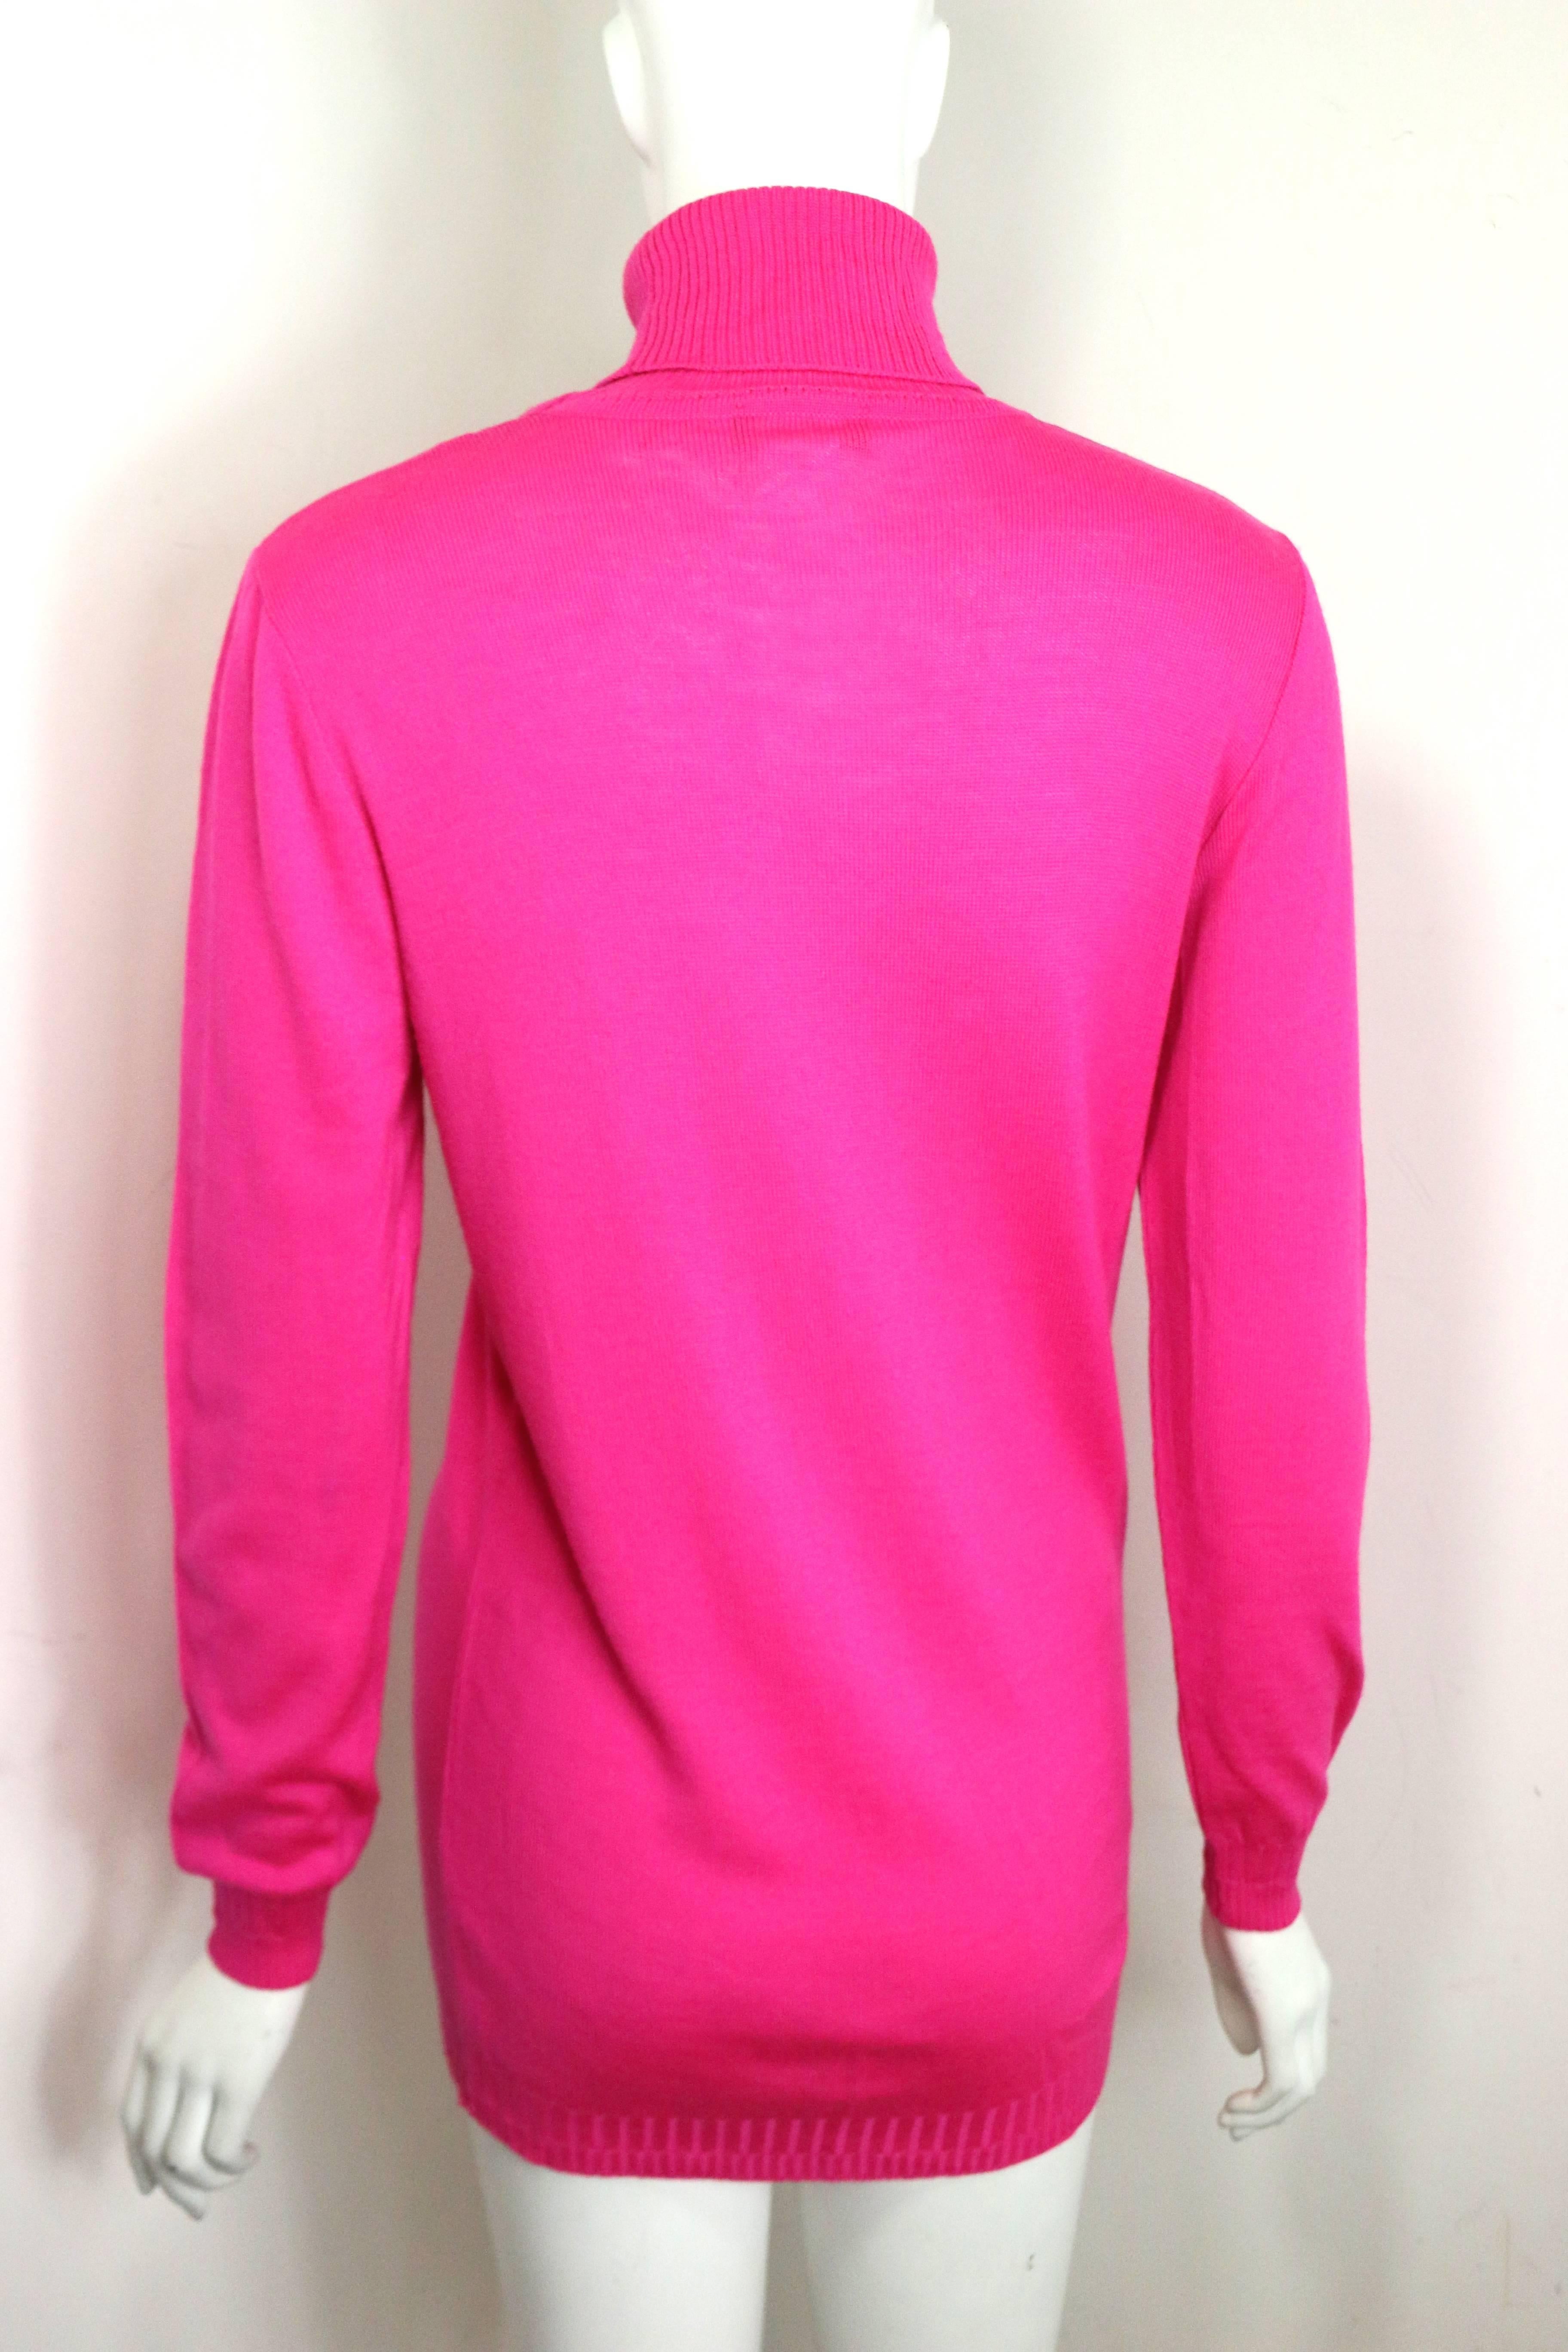 - Vintage 90s Gianni Versace Couture pink wool turtleneck top. 

- Made in Italy. 

- Bust: 28 inches. Shoulder: 15 inches. Sleeves: 22 inches. Height: 28 inches. 

- 100% Wool. 


